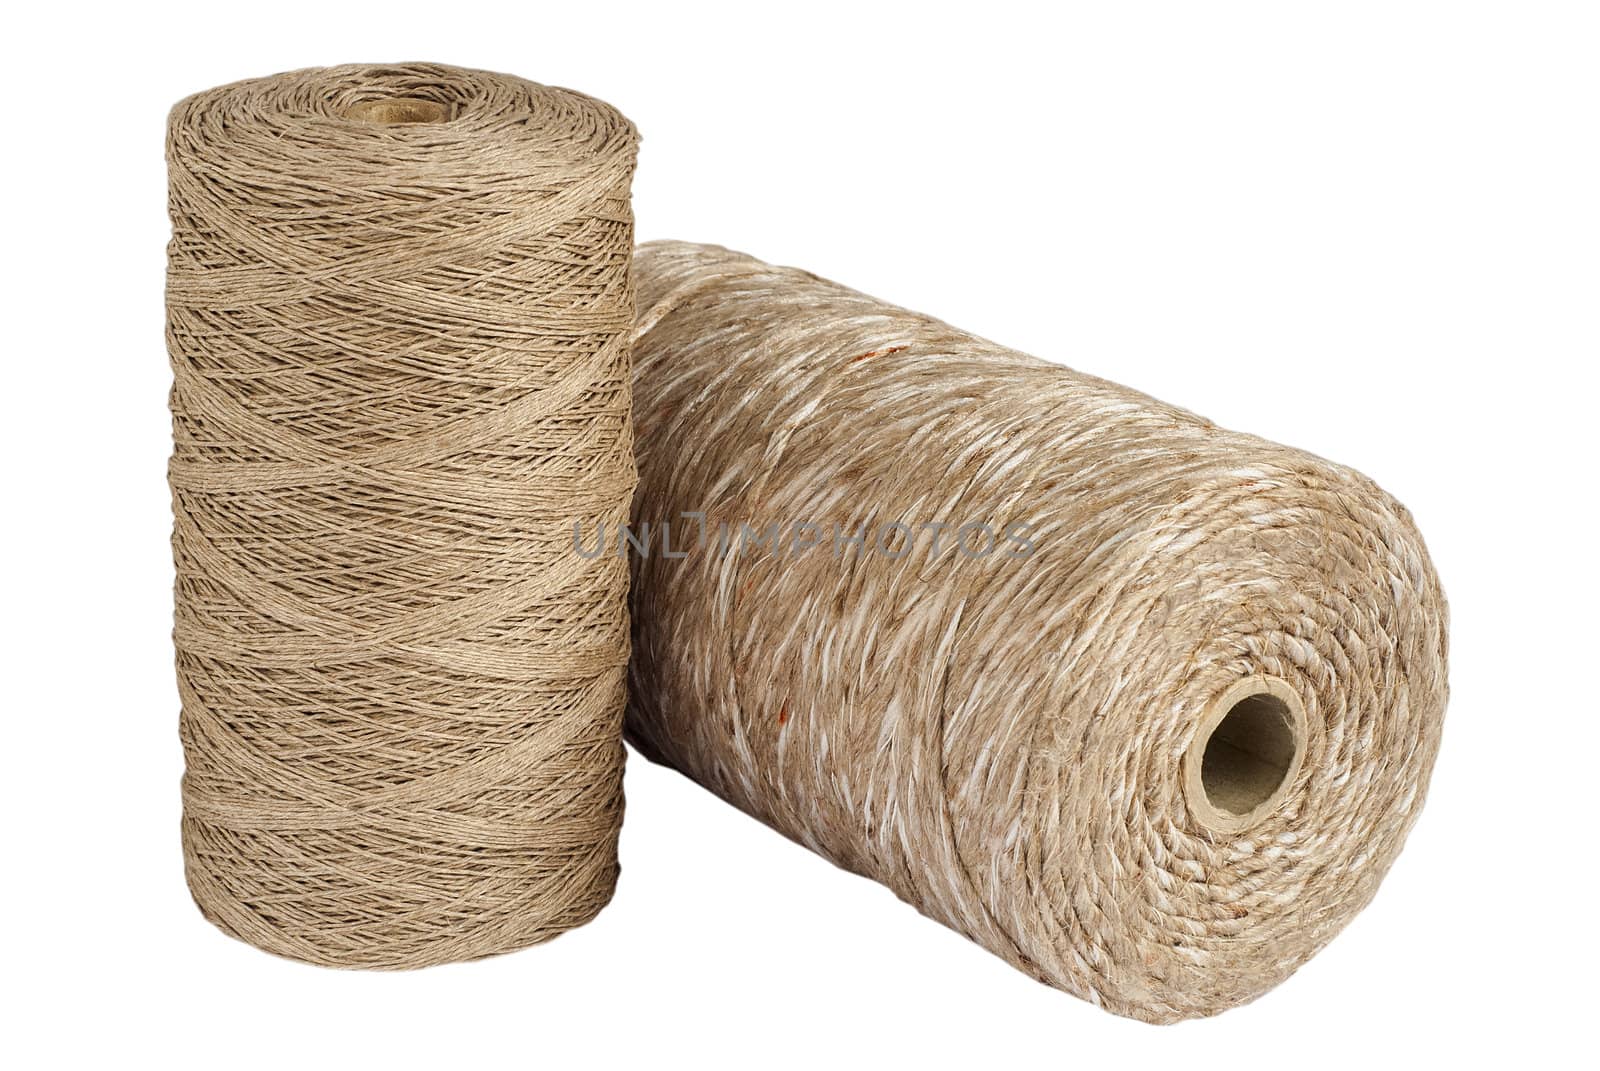 Variety of natural cord rolls isolated on white background